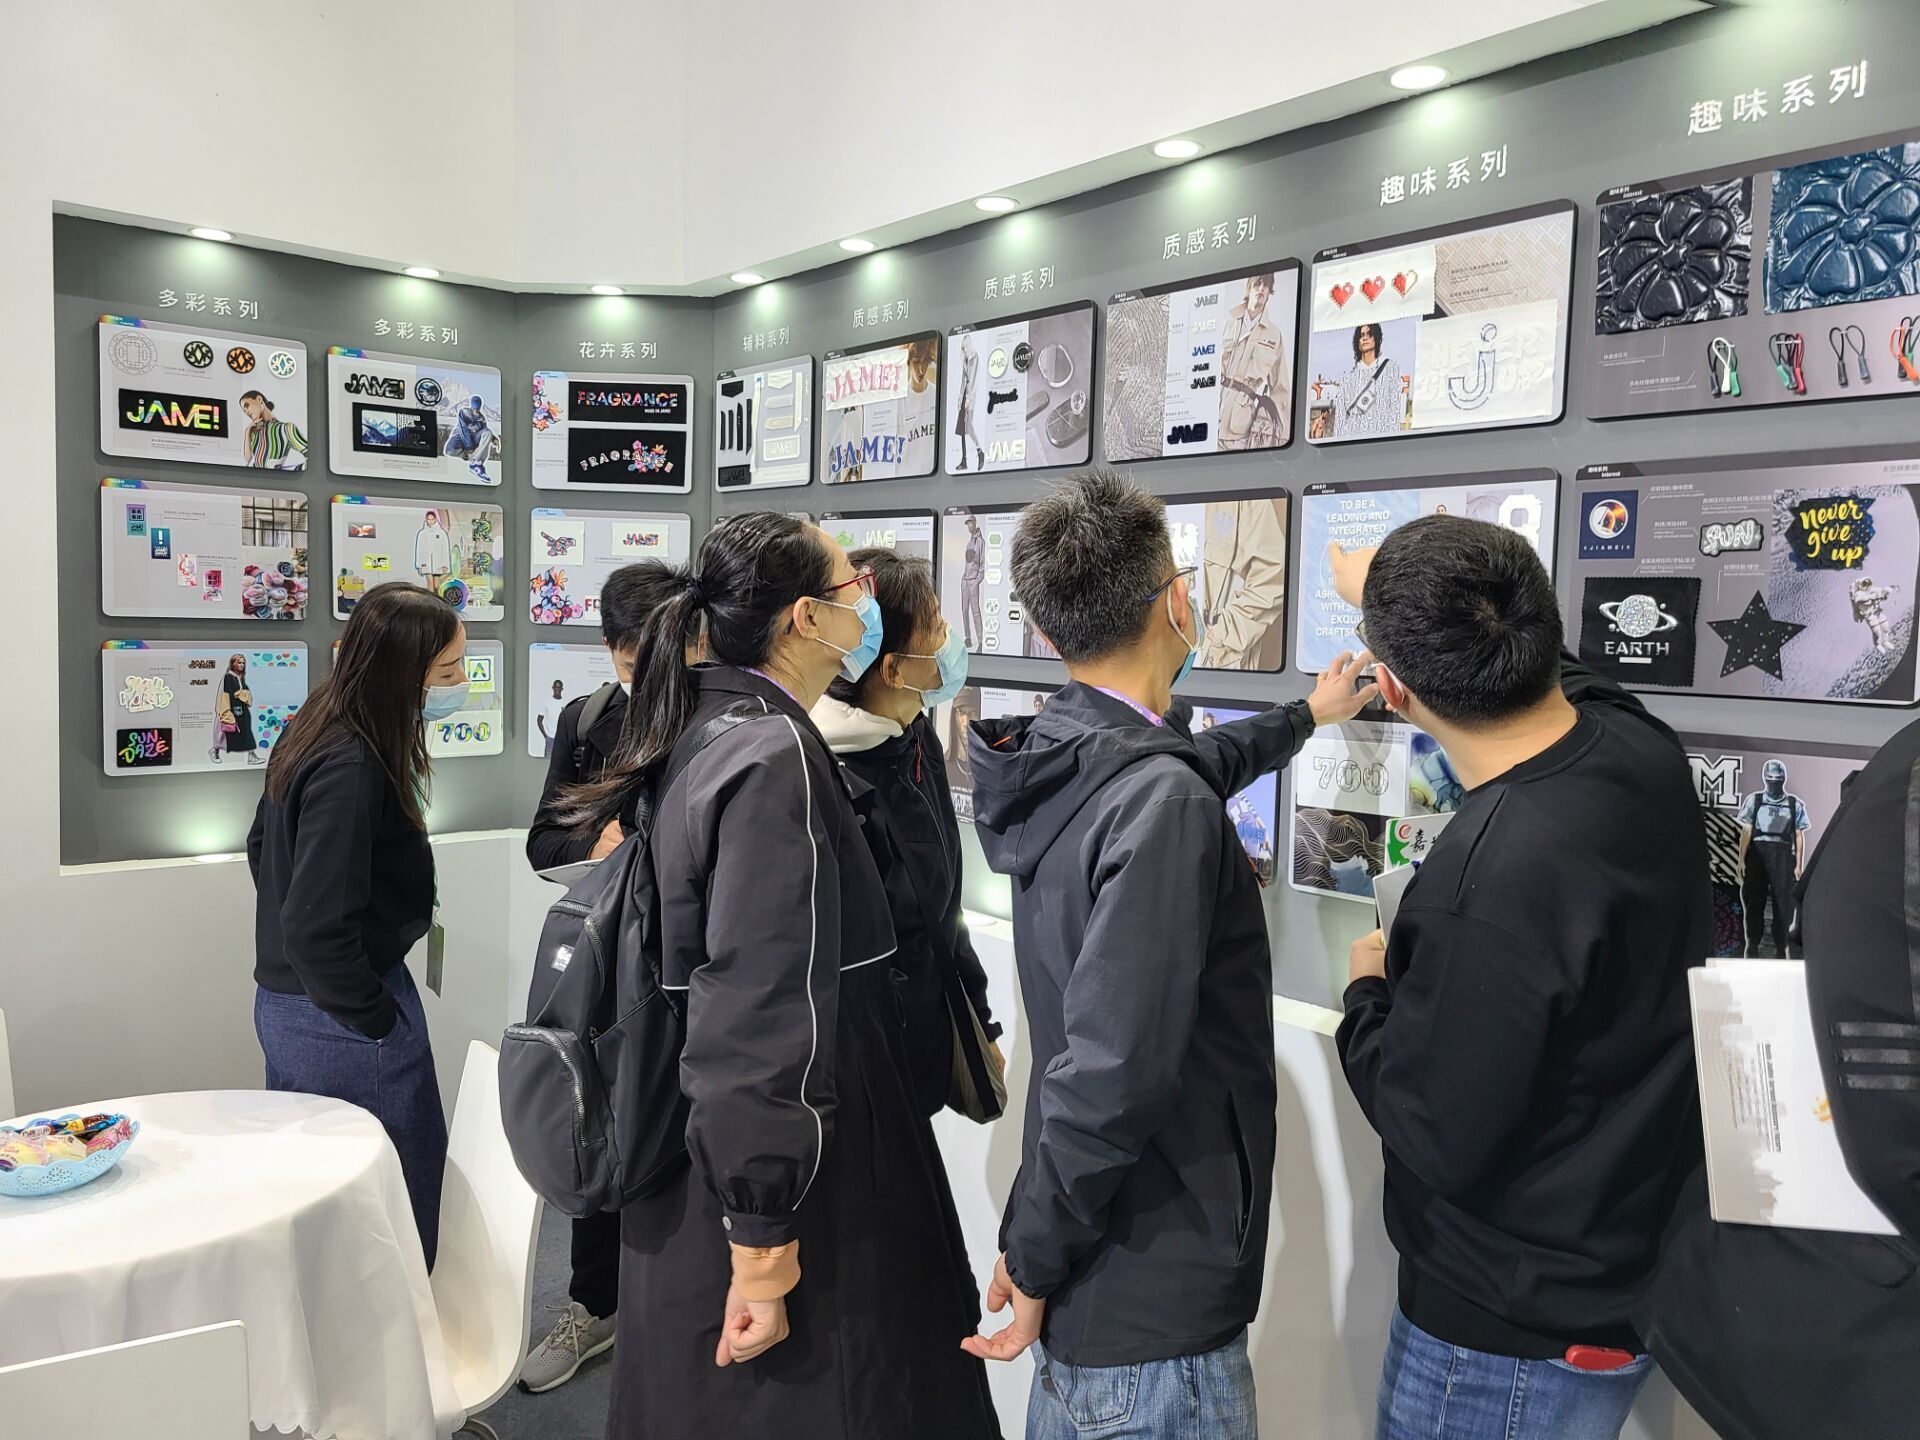 The Intertextile Fabrics and Accessory Exhibition Ended on 19th March 2021